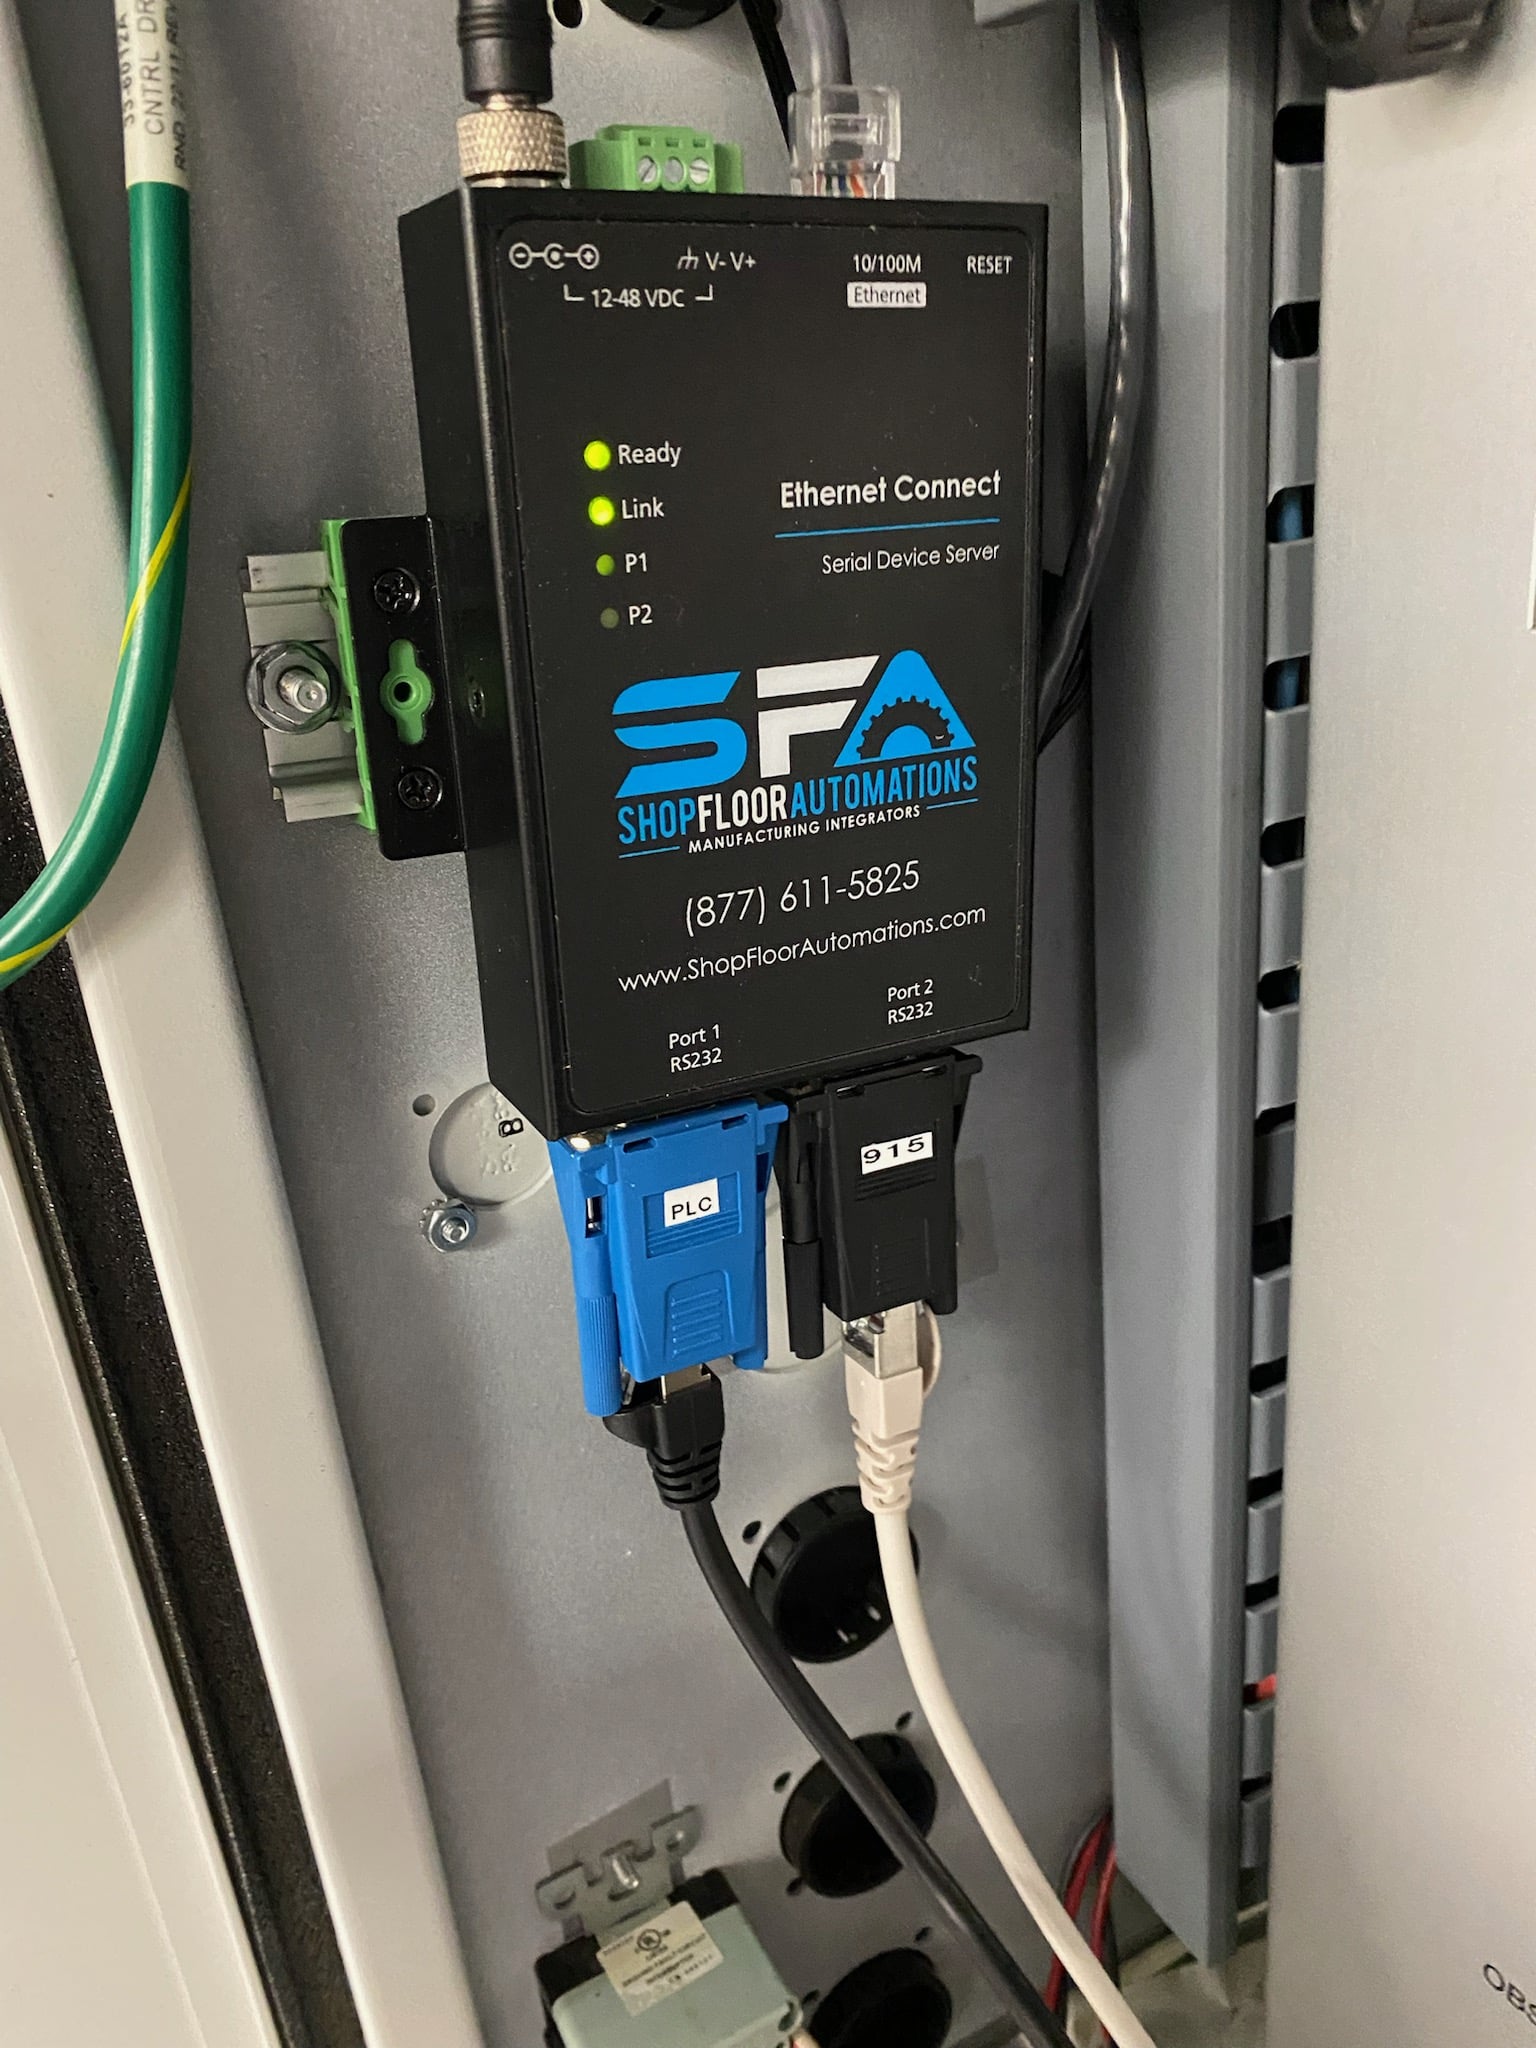 A Wired Ethernet Connect with 2 ports is mounted and plugged into a machine, giving the machine ethernet capability.